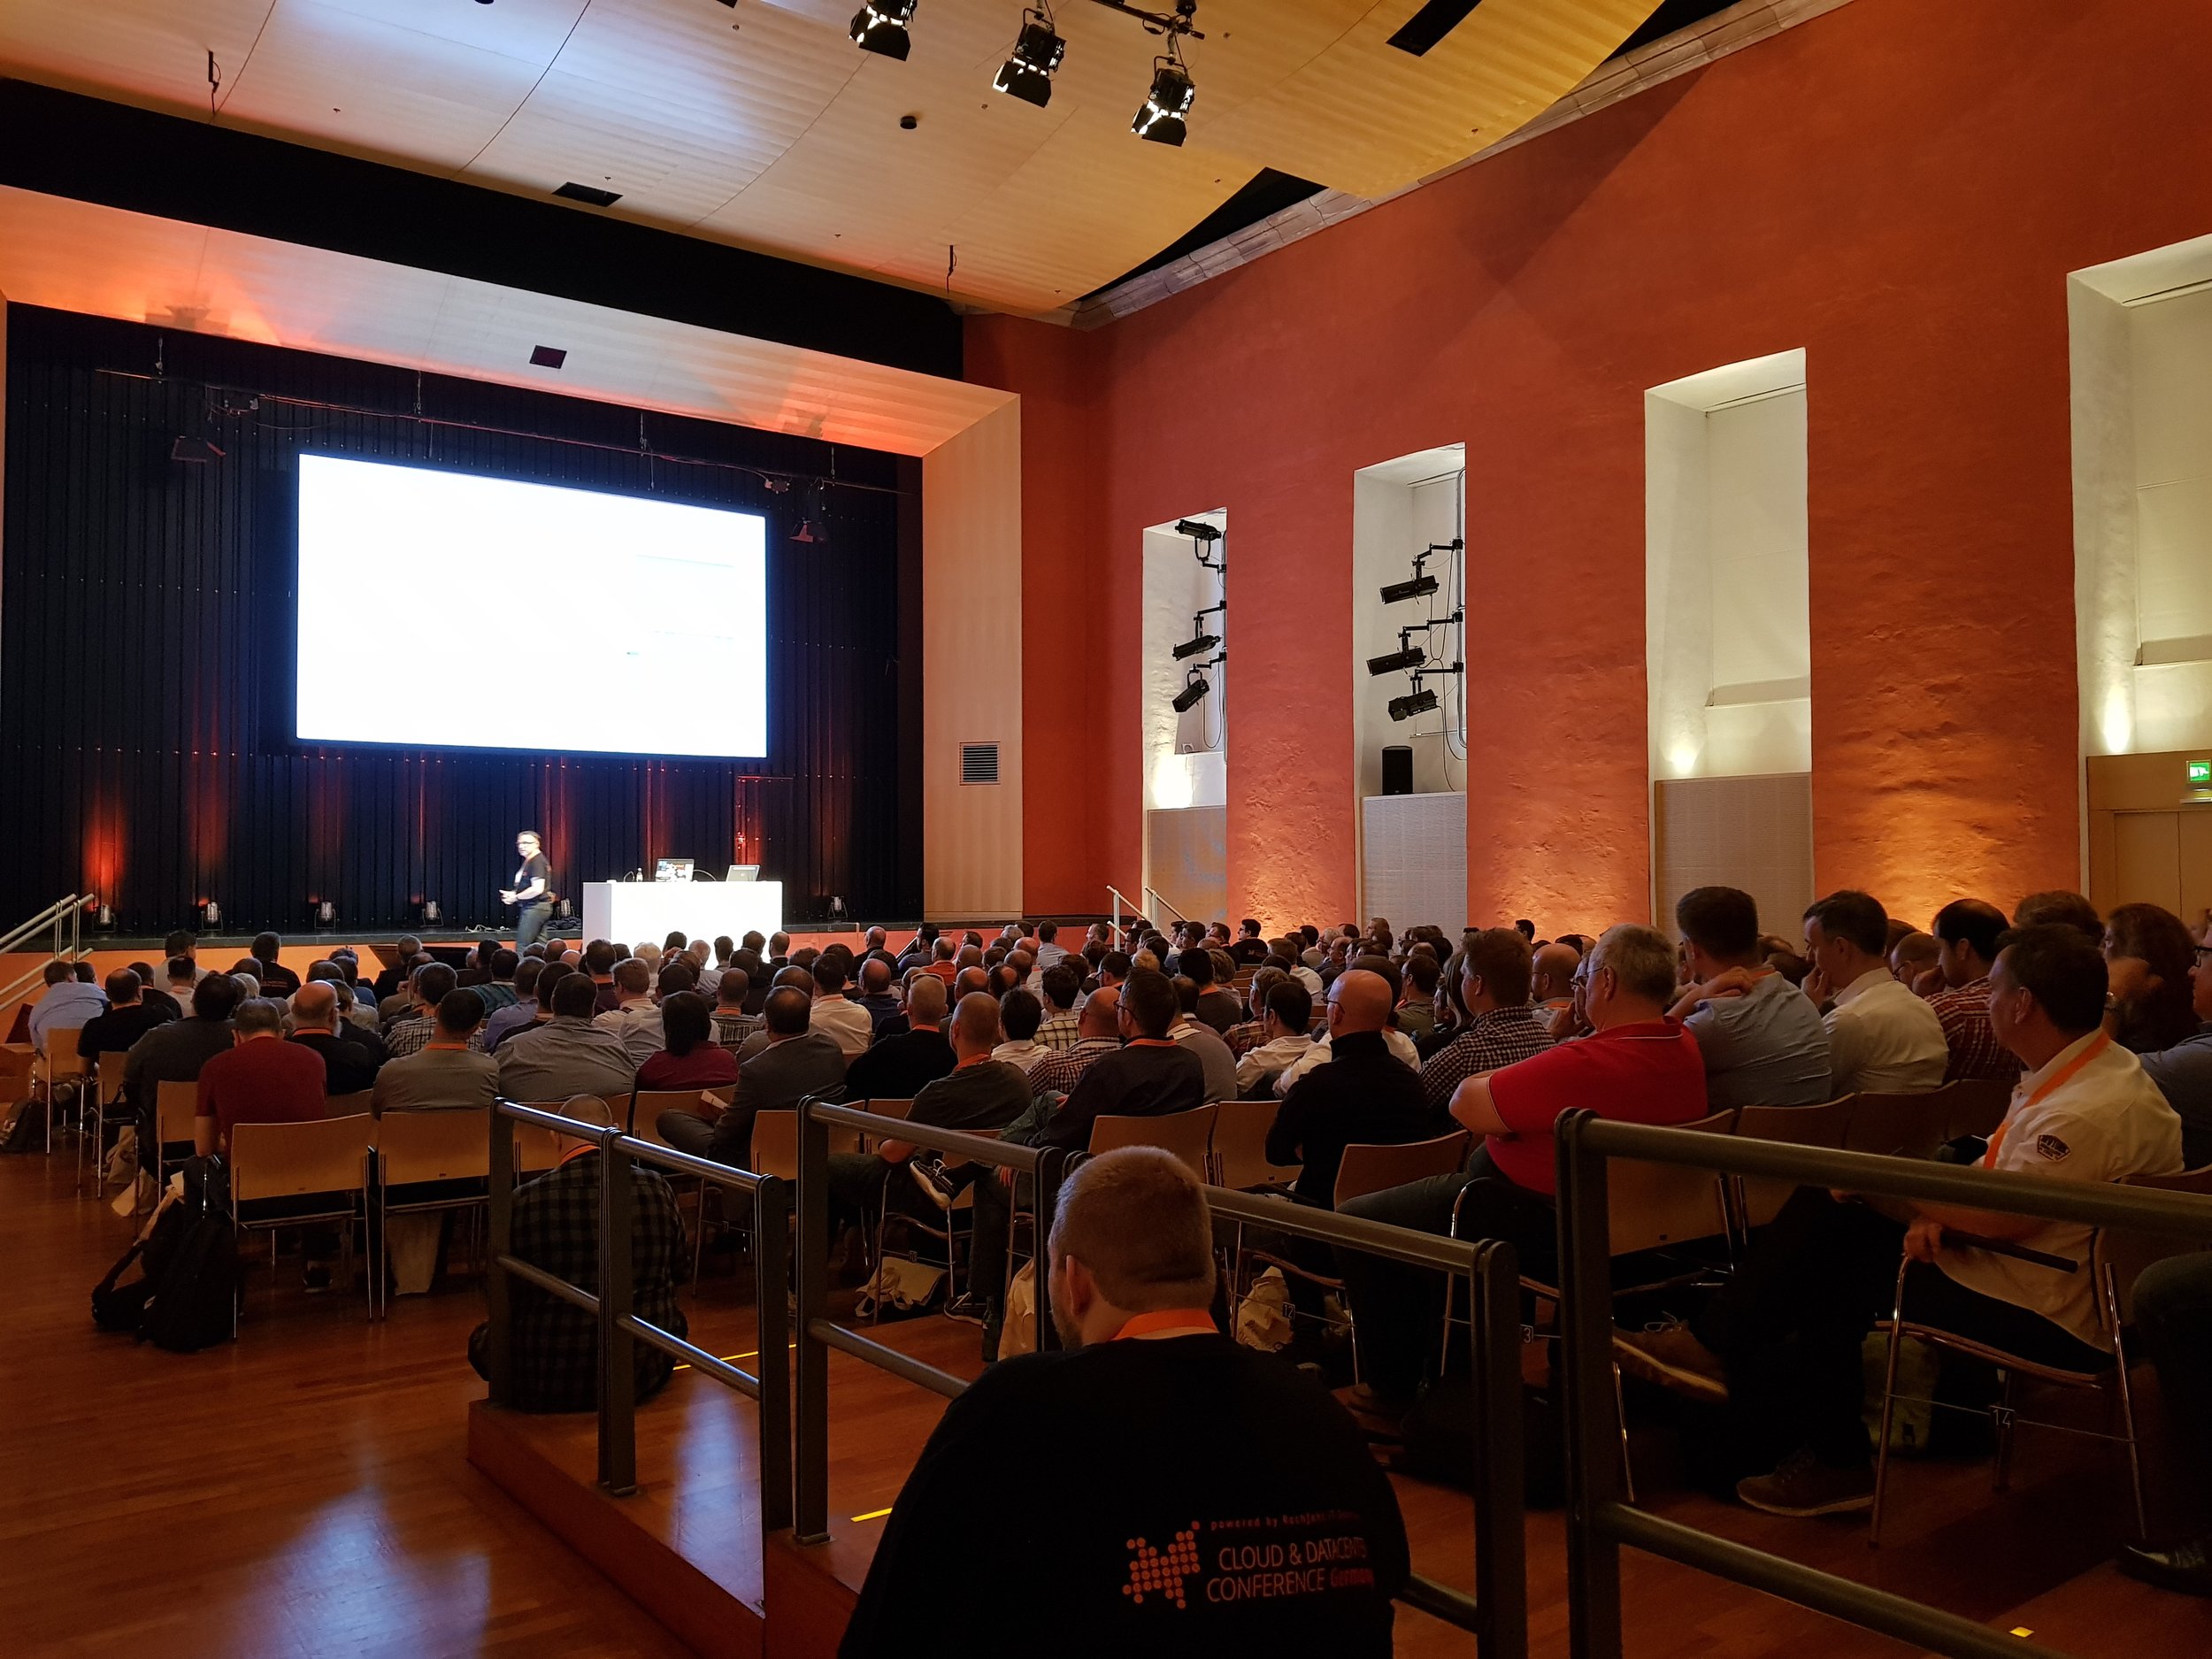 Cloud & Datacenter Conference Germany — ESCde GmbH